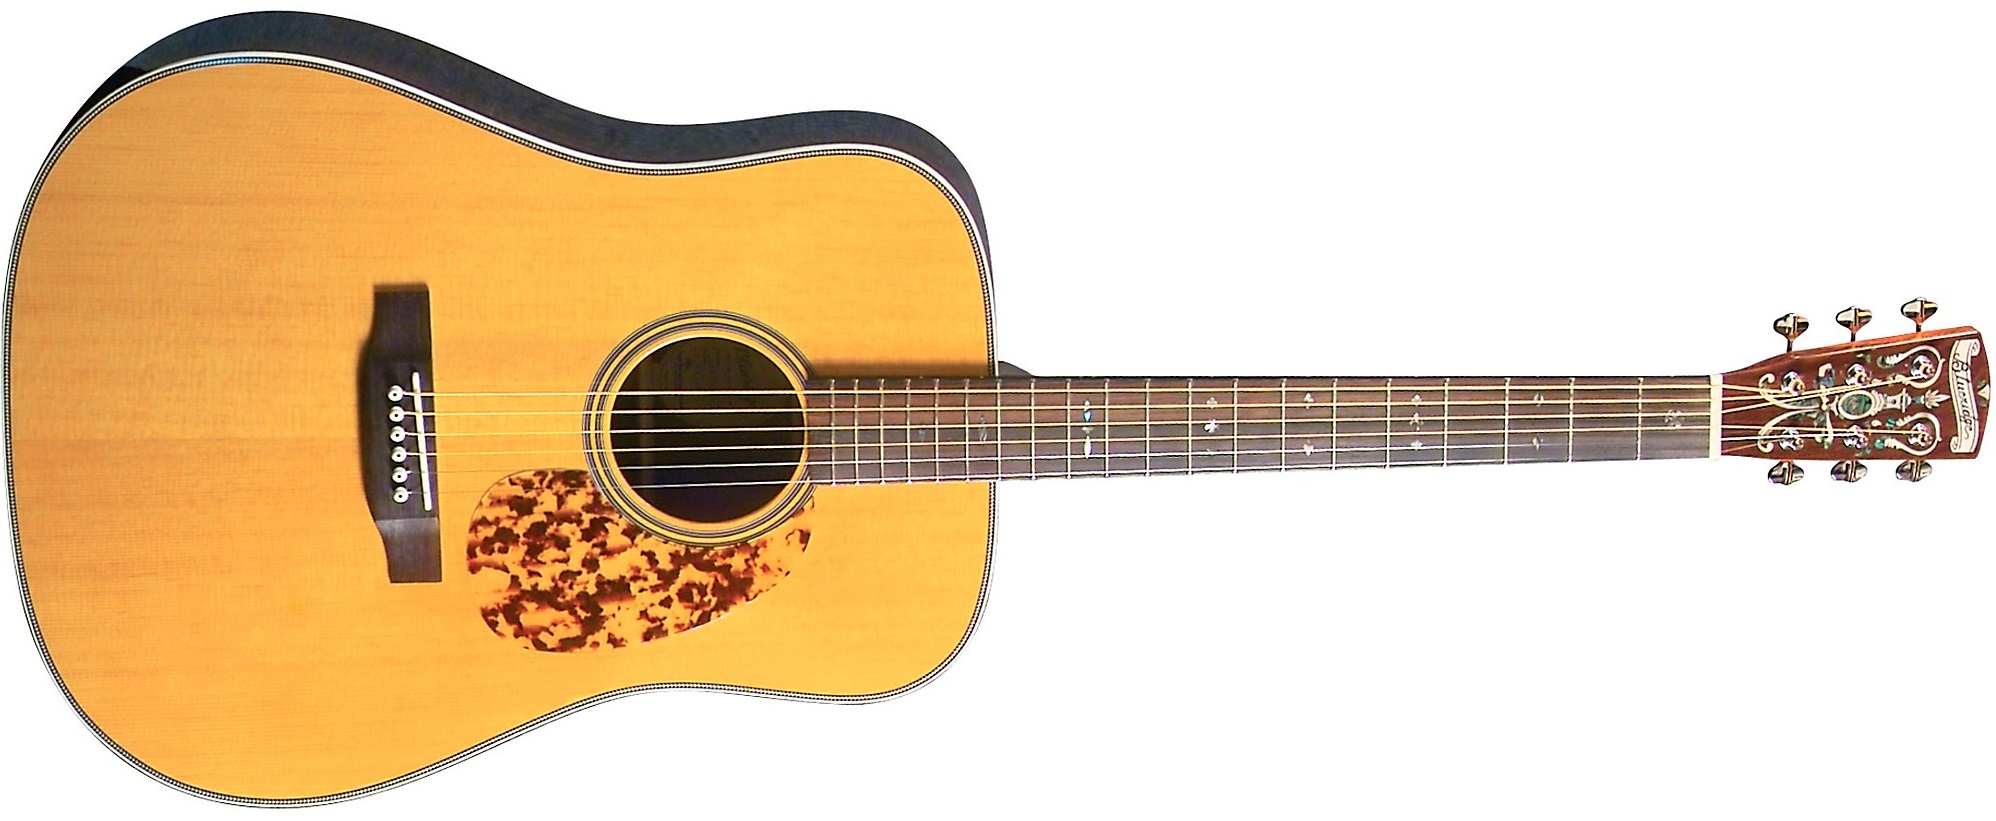 Blueridge BR-160 Historic Series Acoustic Guitar on a white background